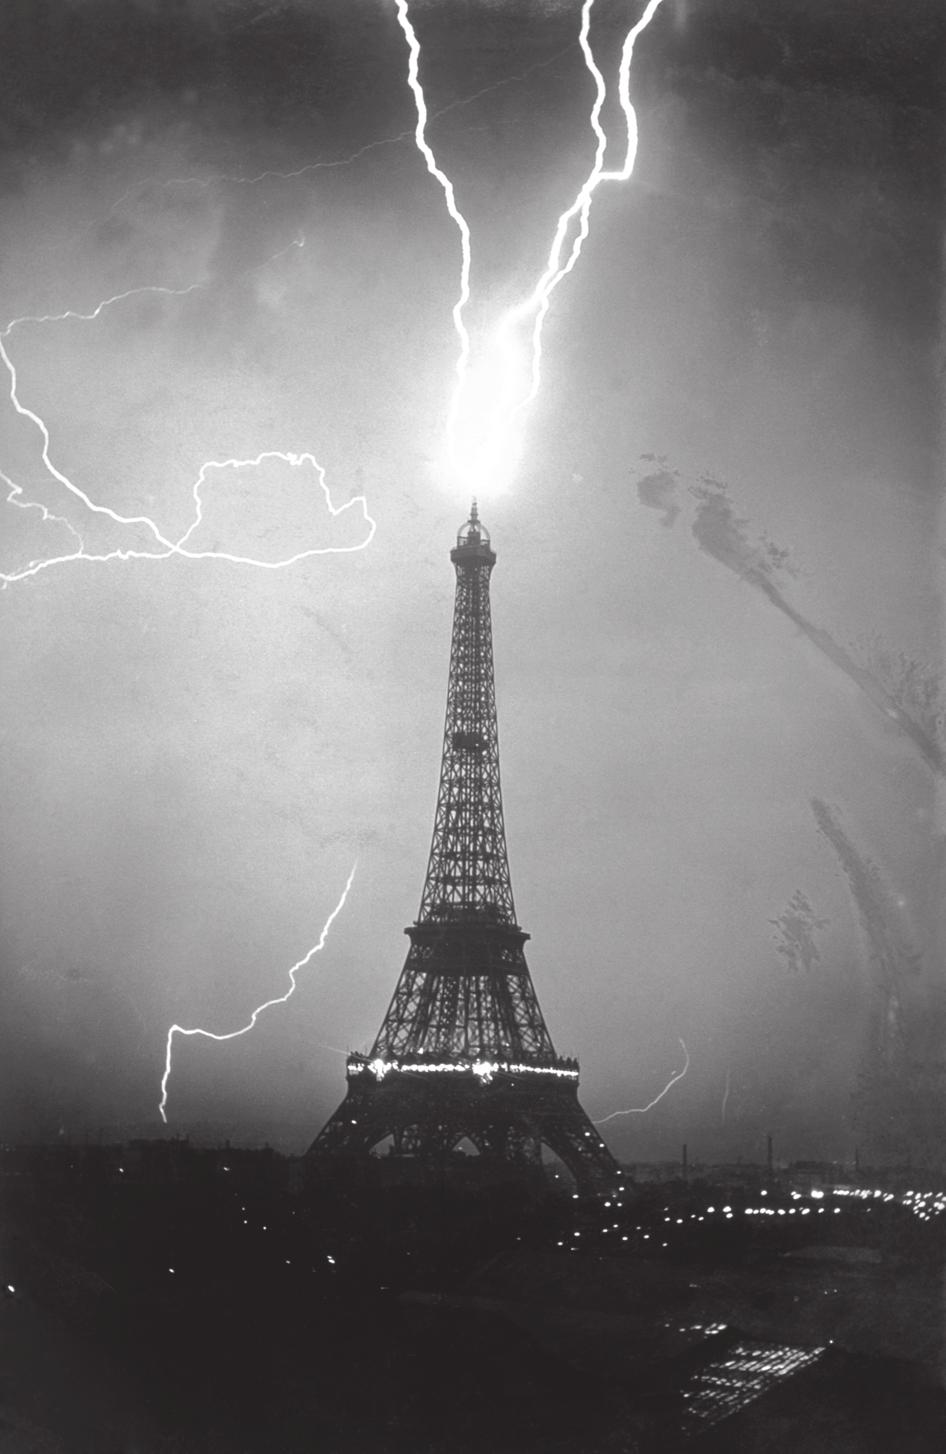 6 3 During a thunderstorm lightning strikes the Eiffel Tower. In lightning the temperature can reach 30 000 C. This causes nitrogen and oxygen in the air to react, producing nitrogen oxide.